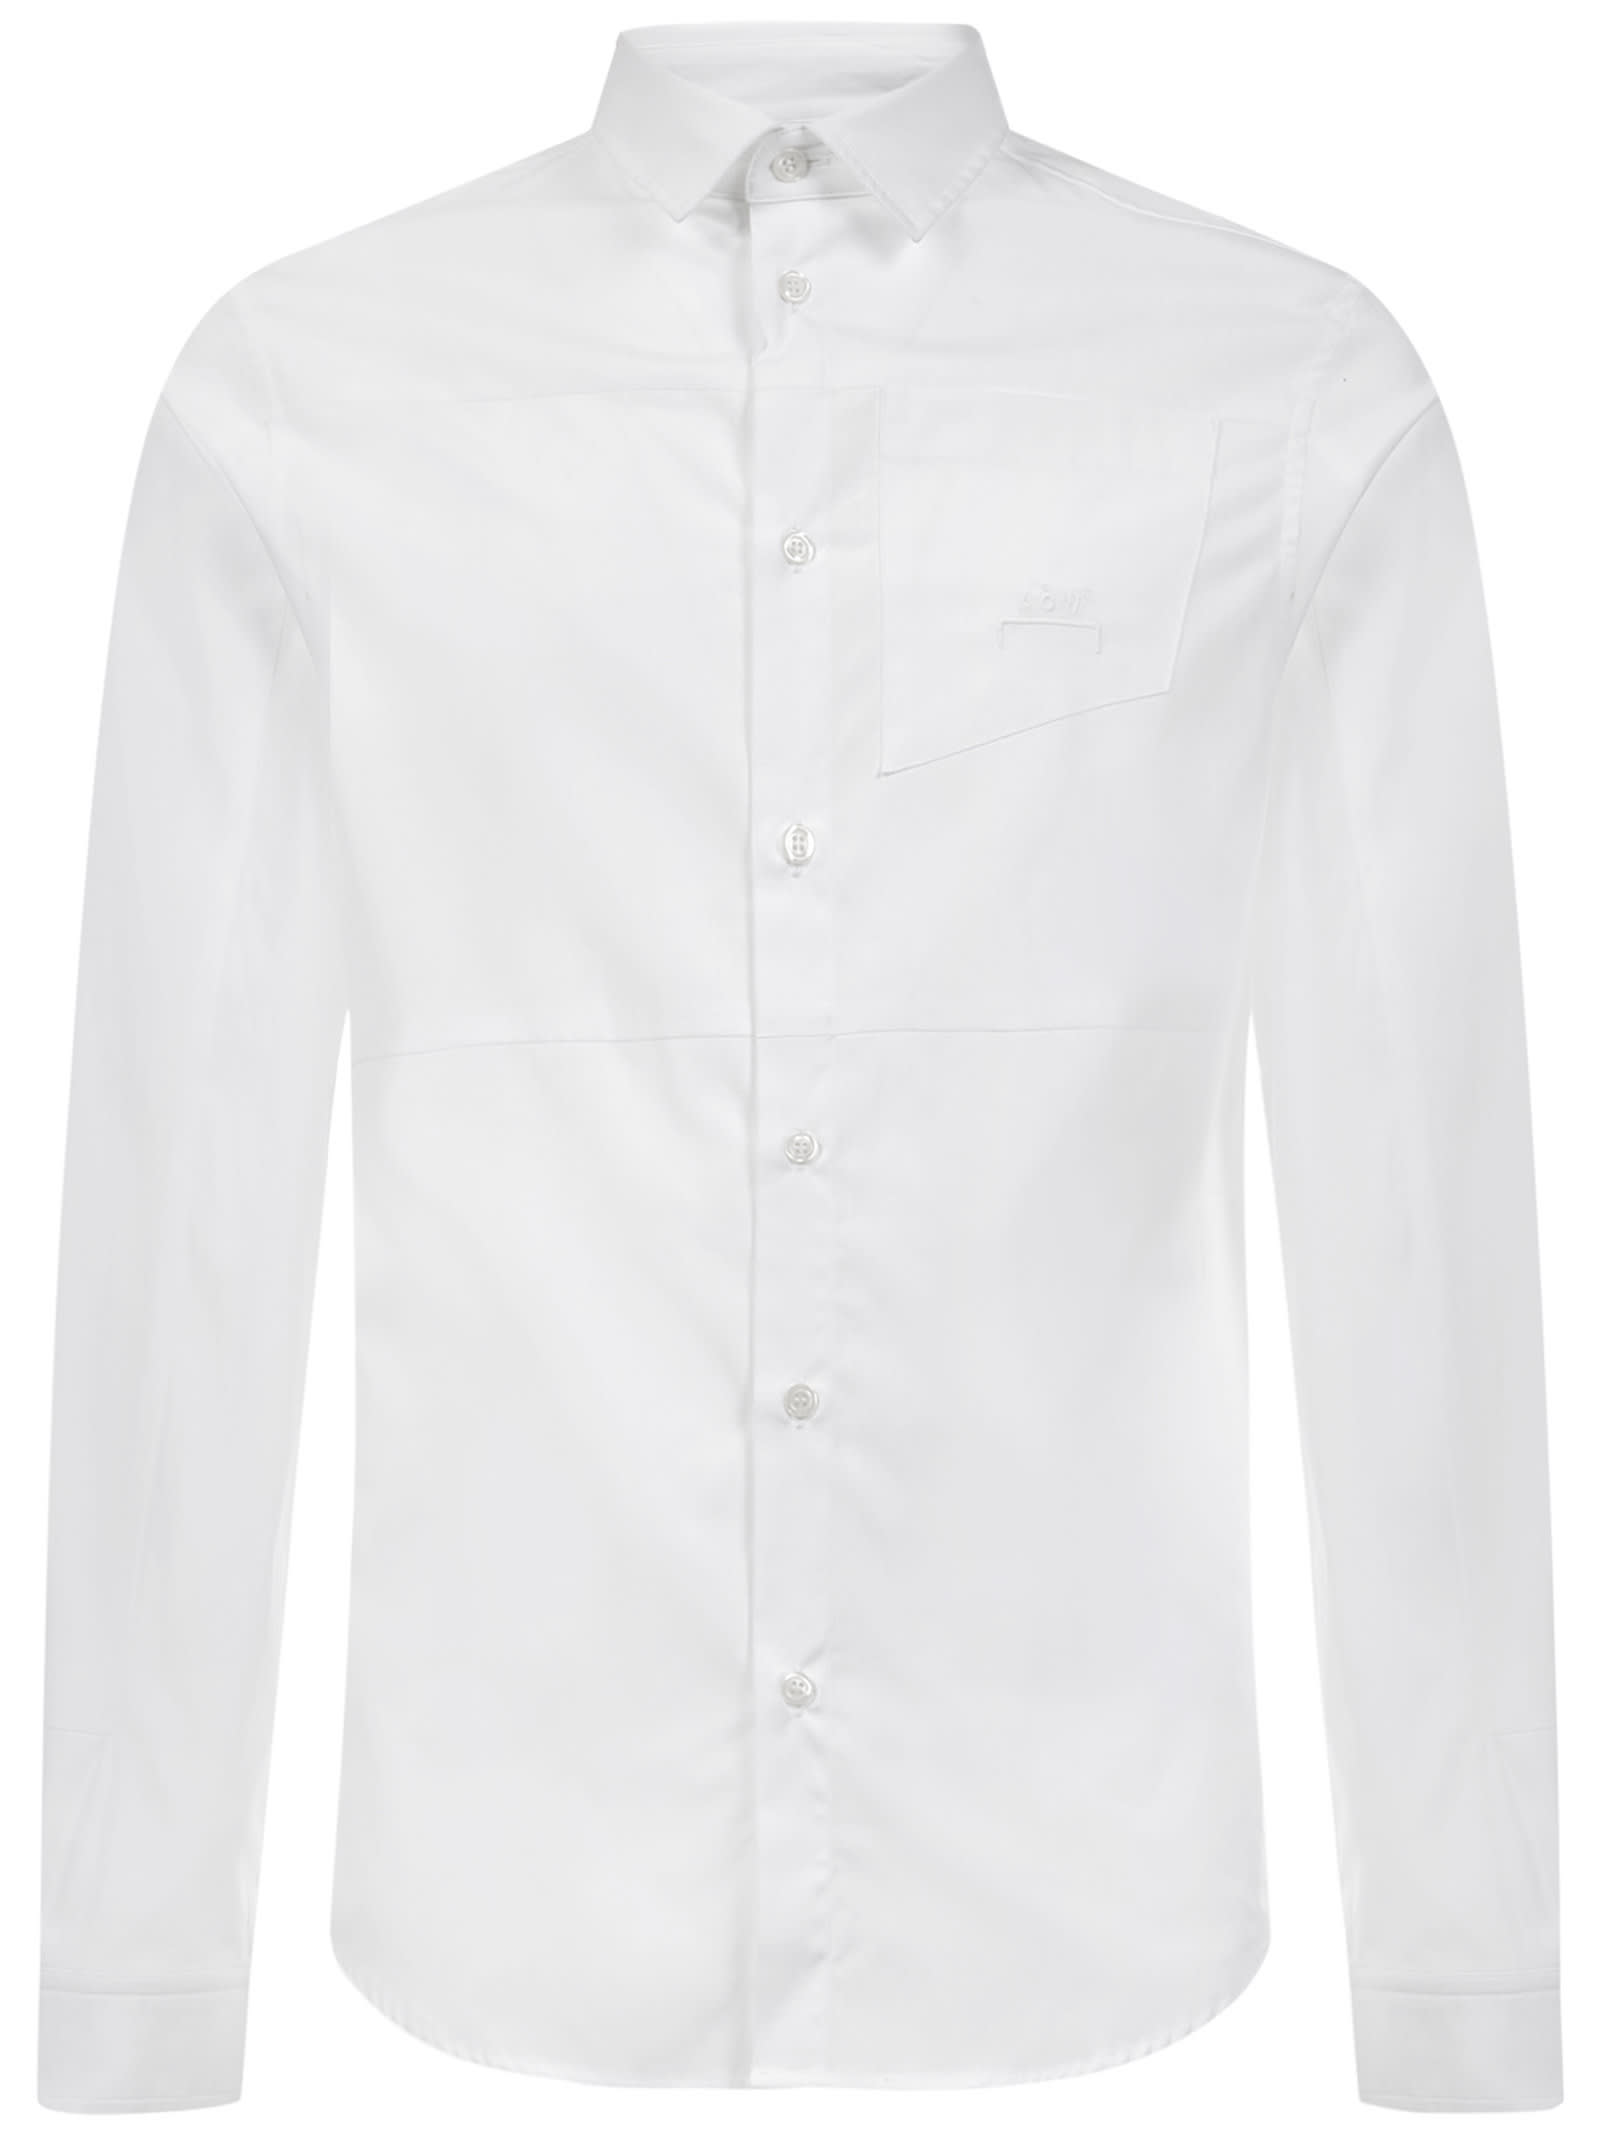 A-COLD-WALL* A COLD WALL ESSENTIAL SHIRT,ACWMSH030 WHITE